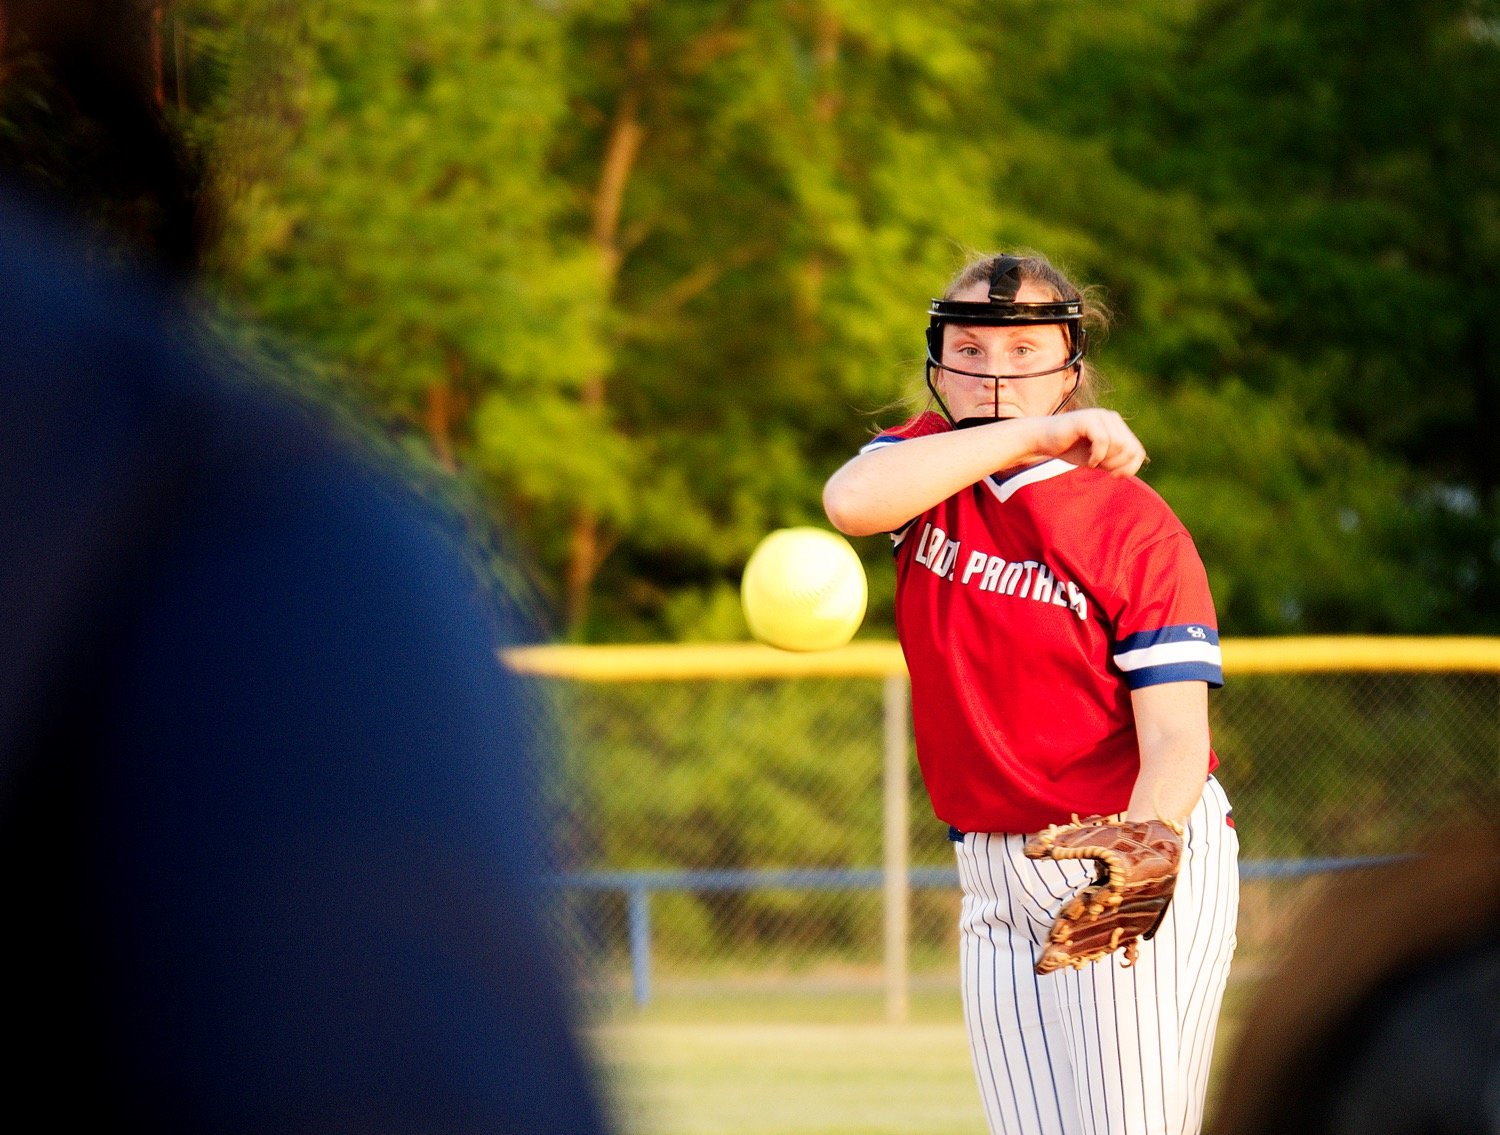 Megan Wallace threw four innings and struck out six in a 23-0 win over Fruitvale.